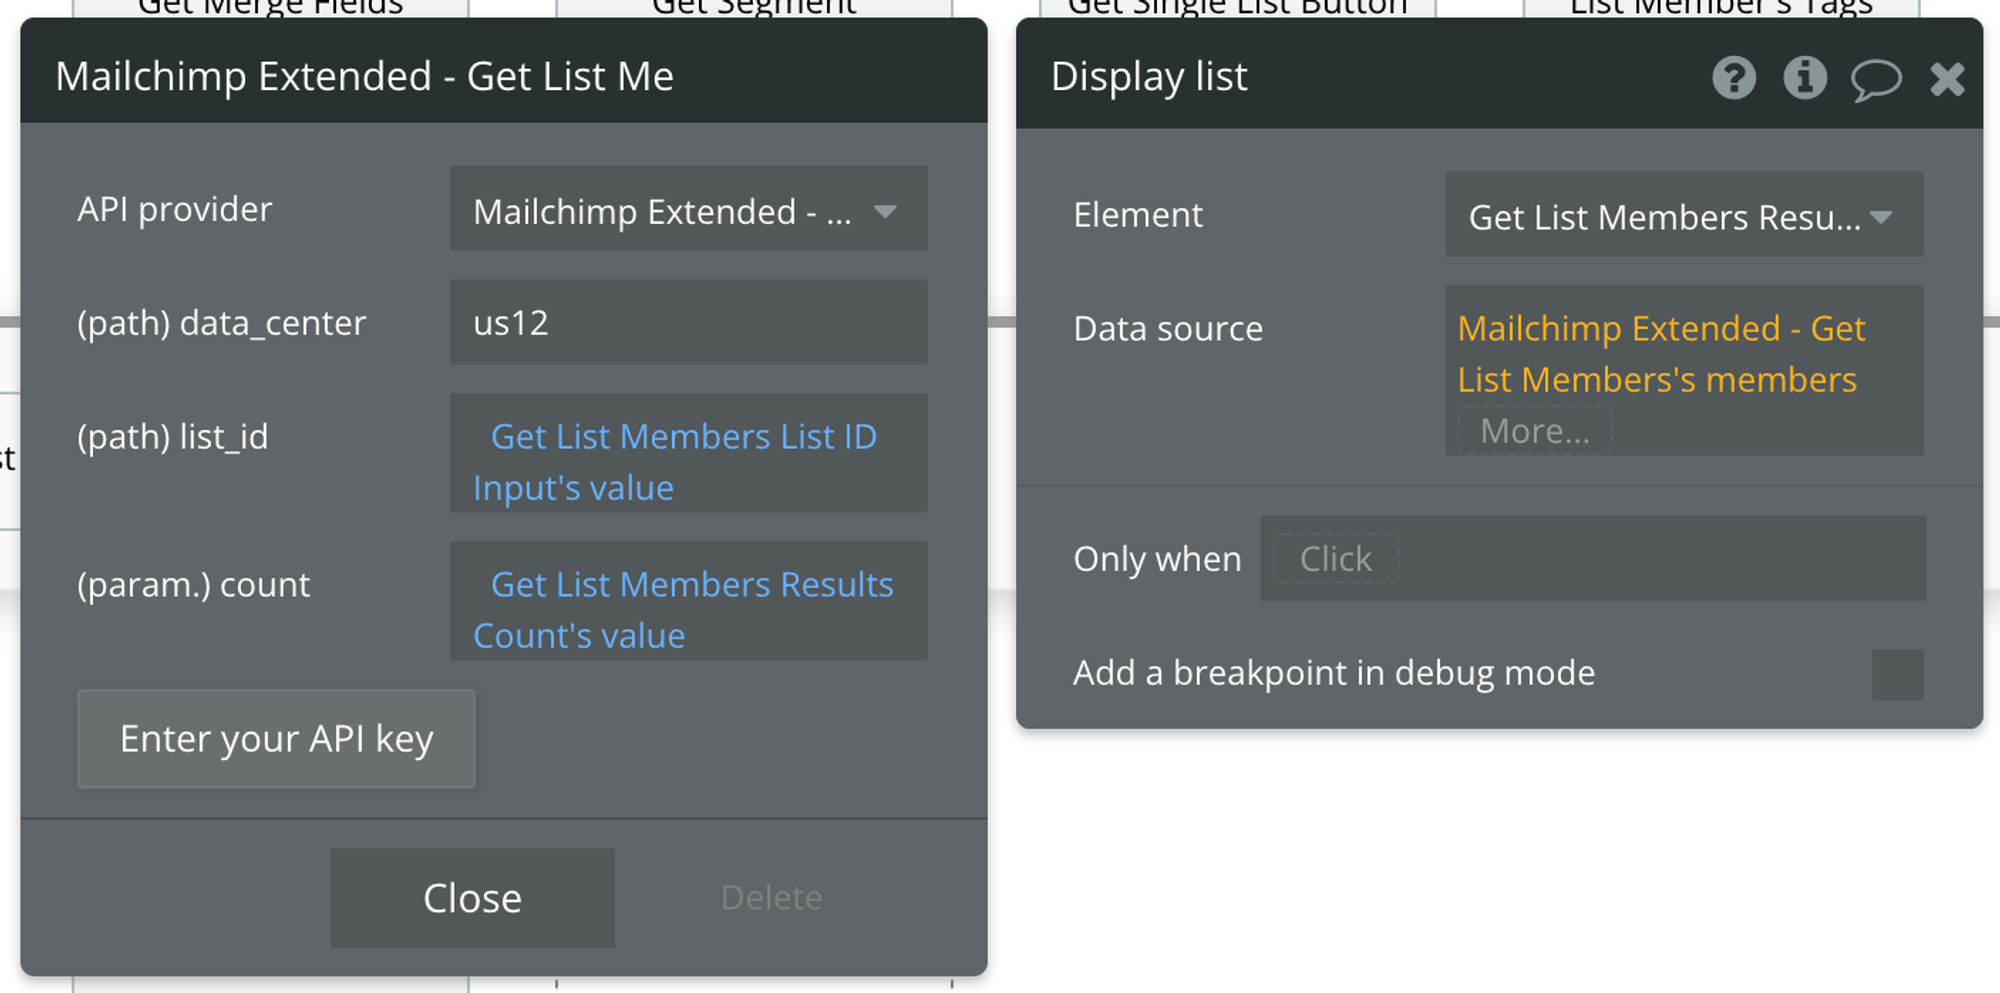 Select Mailchimp Extended - Get List Members's members for the data source